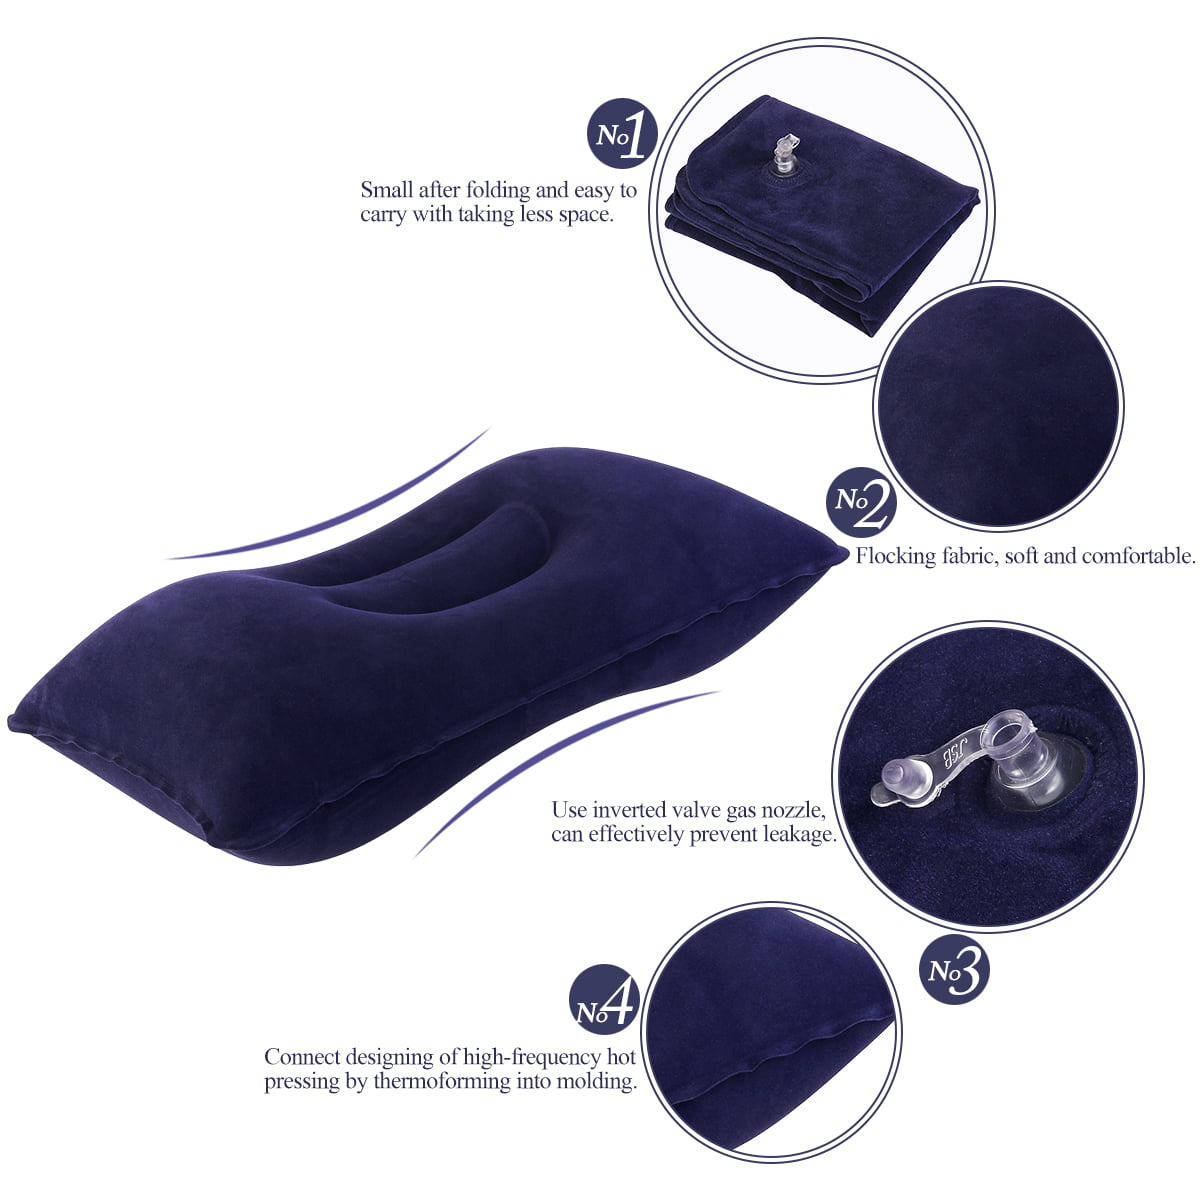 Super-Thick Flocking Fabric Inflatable Pillow Portable Travel Pillow Dark Bl... 